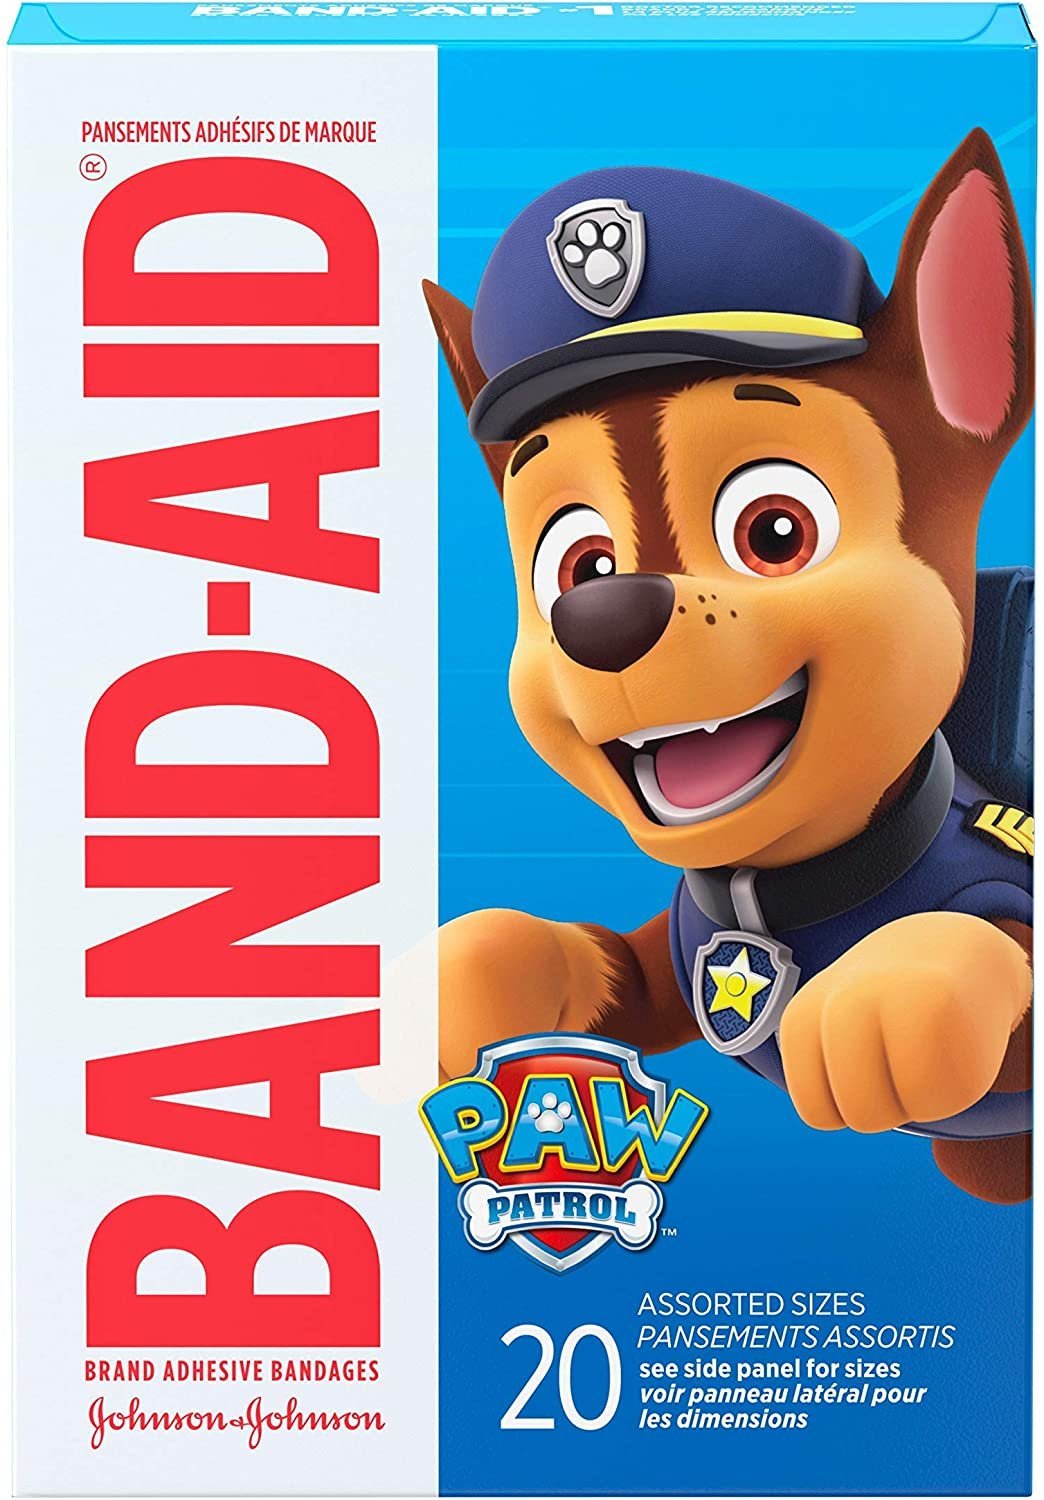 Band-Aid | Band-Aid Brand Adhesive Bandages for Minor Cuts & Scrapes, Wound  Care Featuring Nickelodeon Paw Patrol Characters for Kids and Toddlers,  Assorted Sizes 20 ct - Parallel Import | HKTVmall The